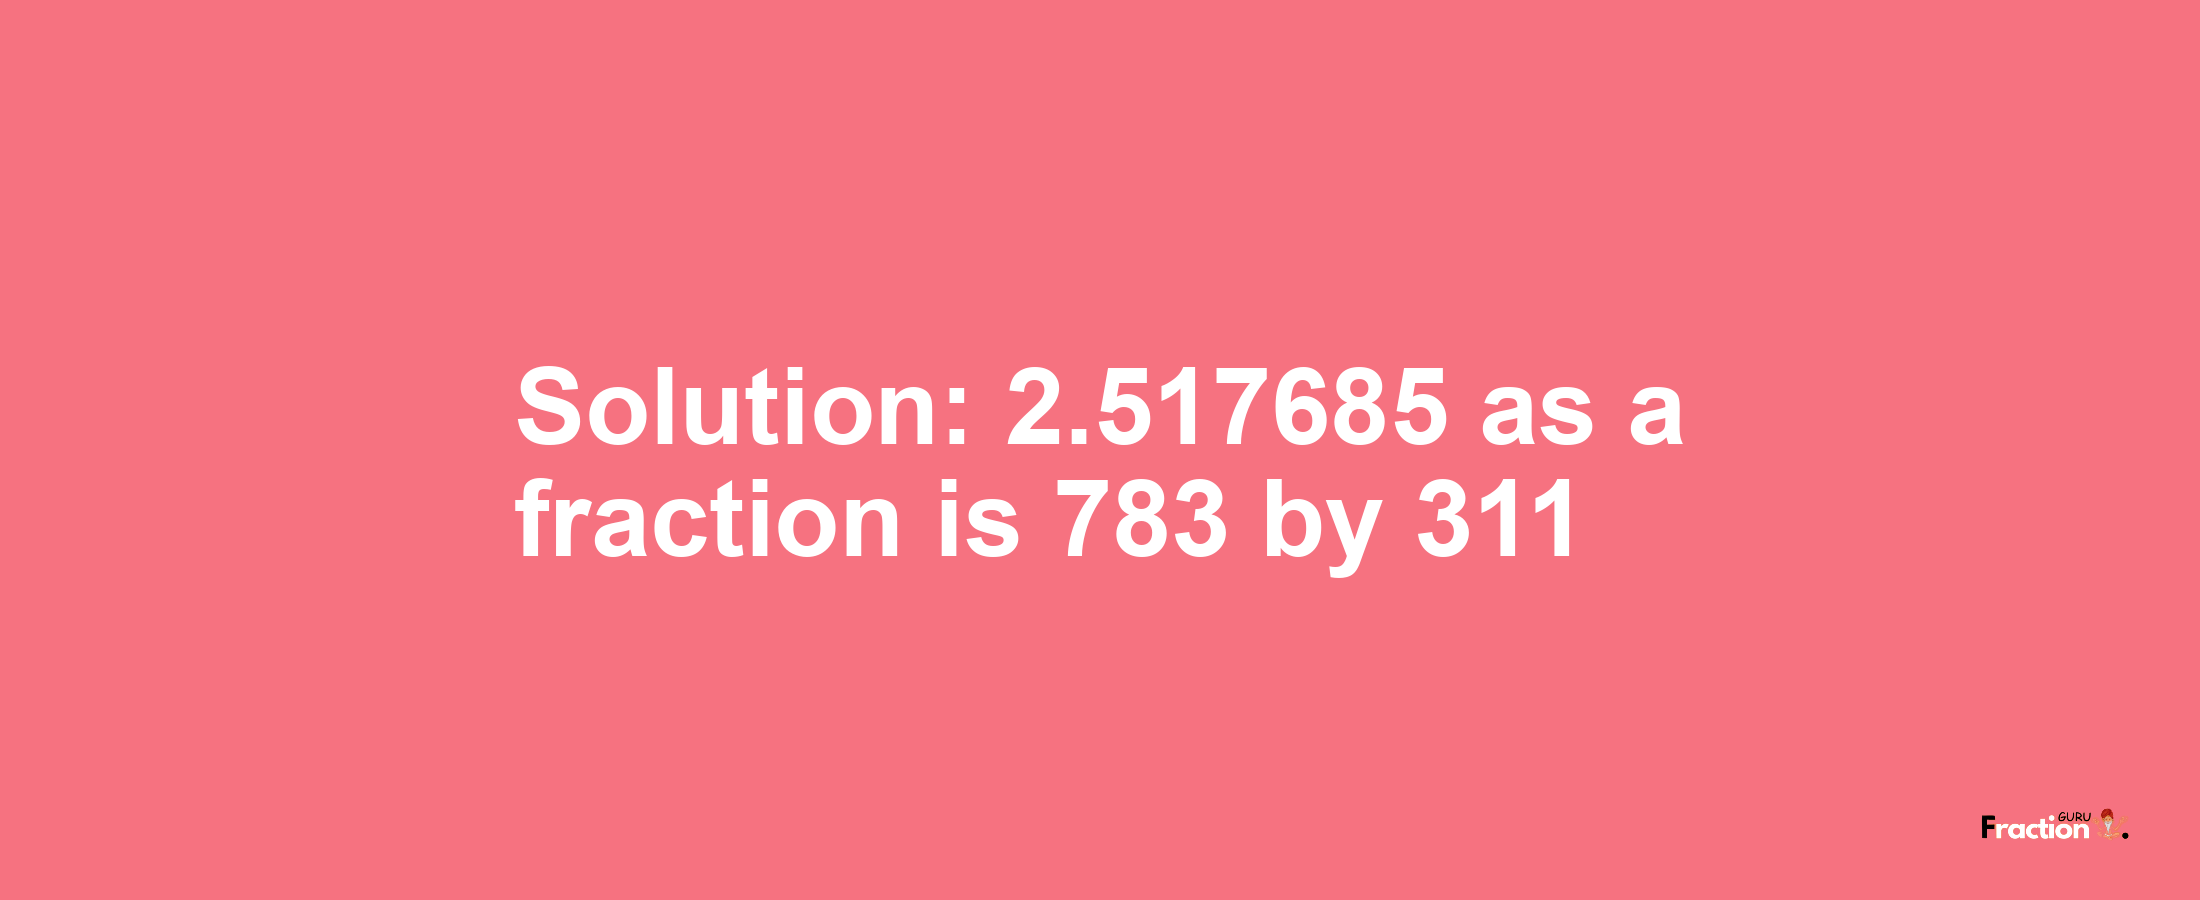 Solution:2.517685 as a fraction is 783/311